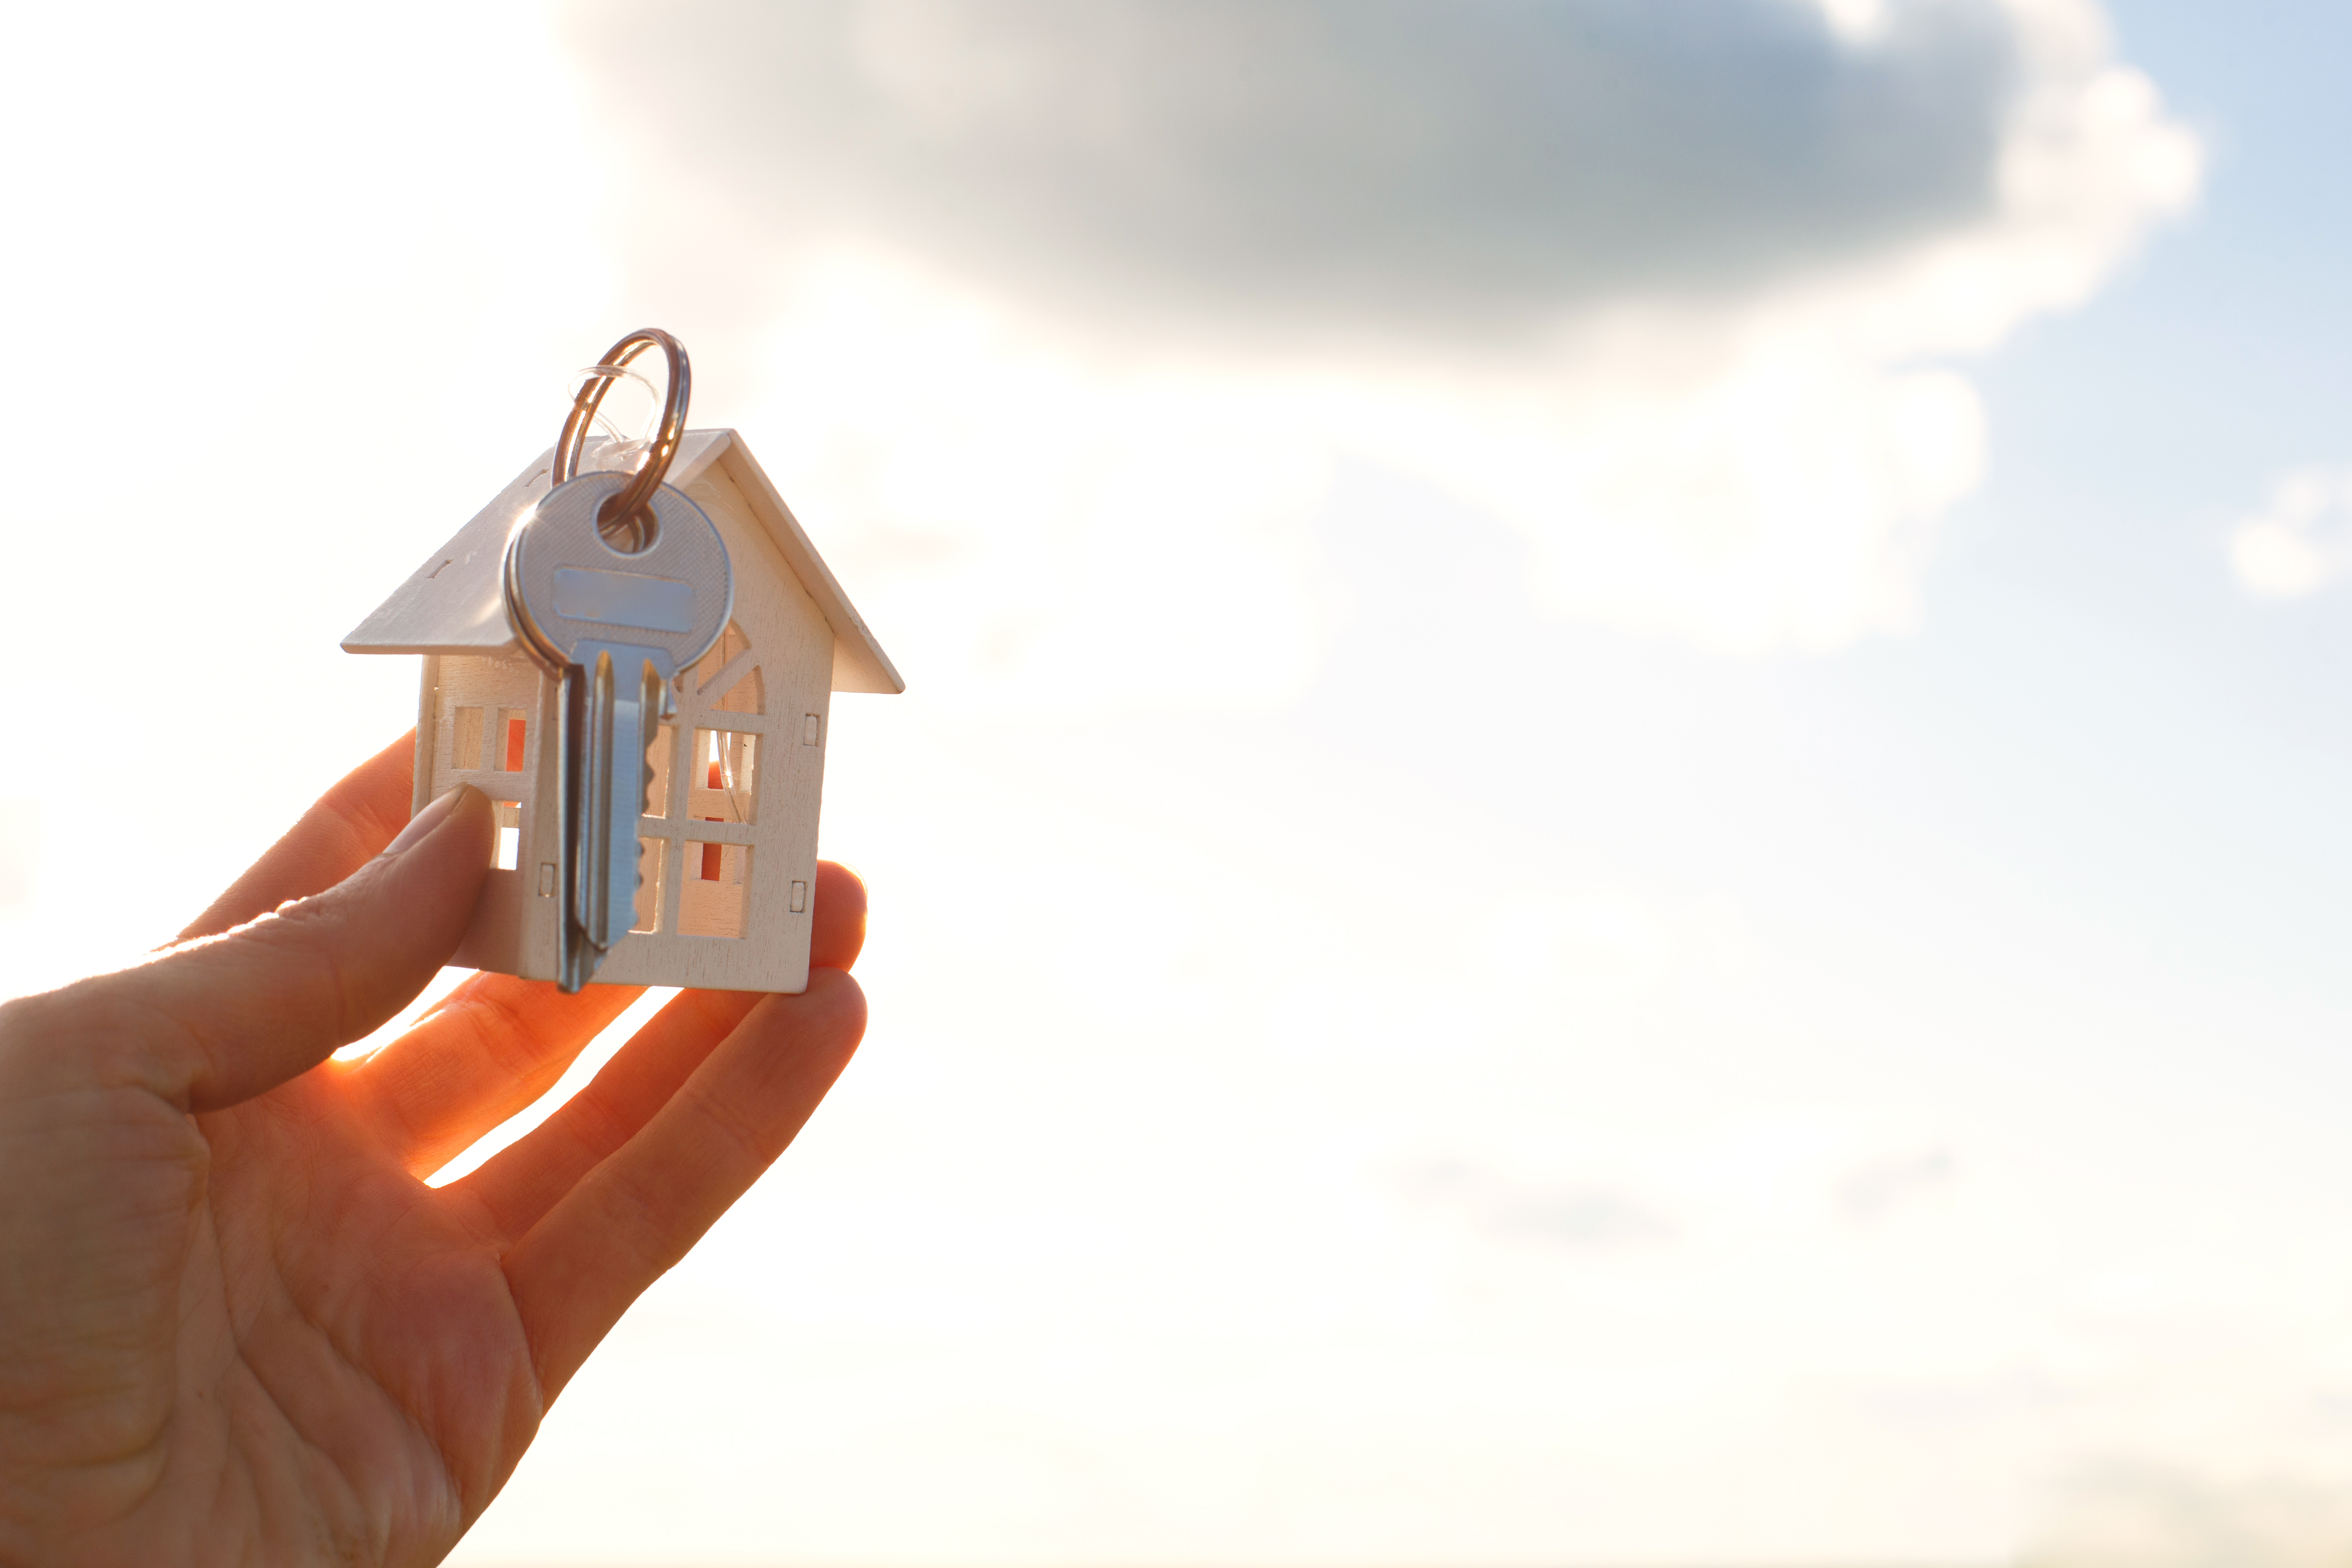 Hand presenting a house-shaped keychain and key in the warm glow of sunrise, embodying the dream of owning a home.